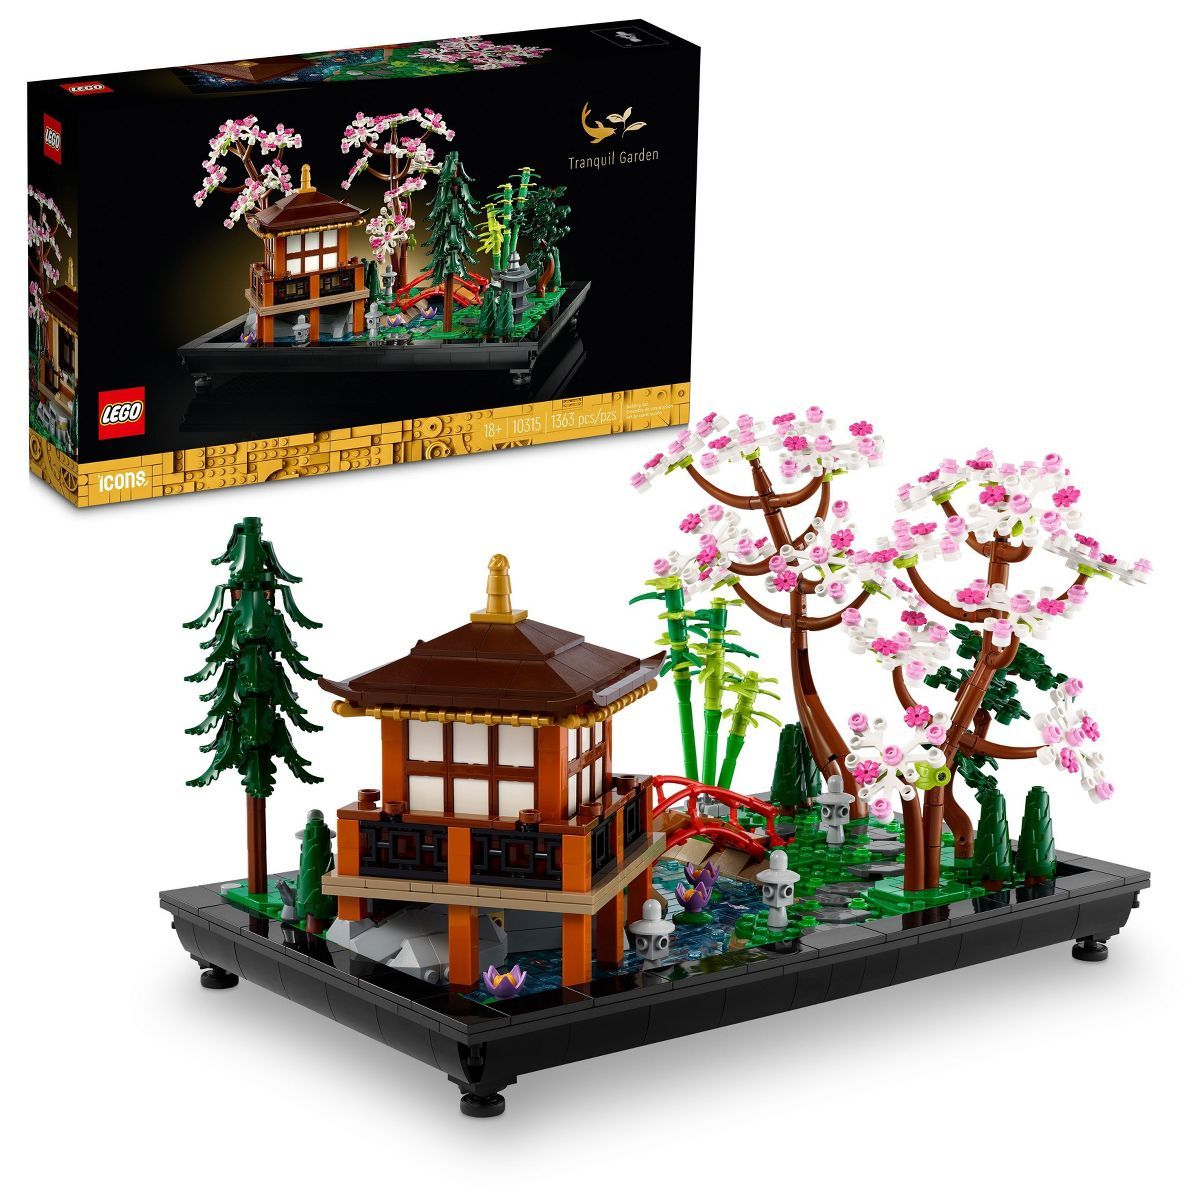 LEGO Icons Tranquil Garden Building Kit 10315 | Target